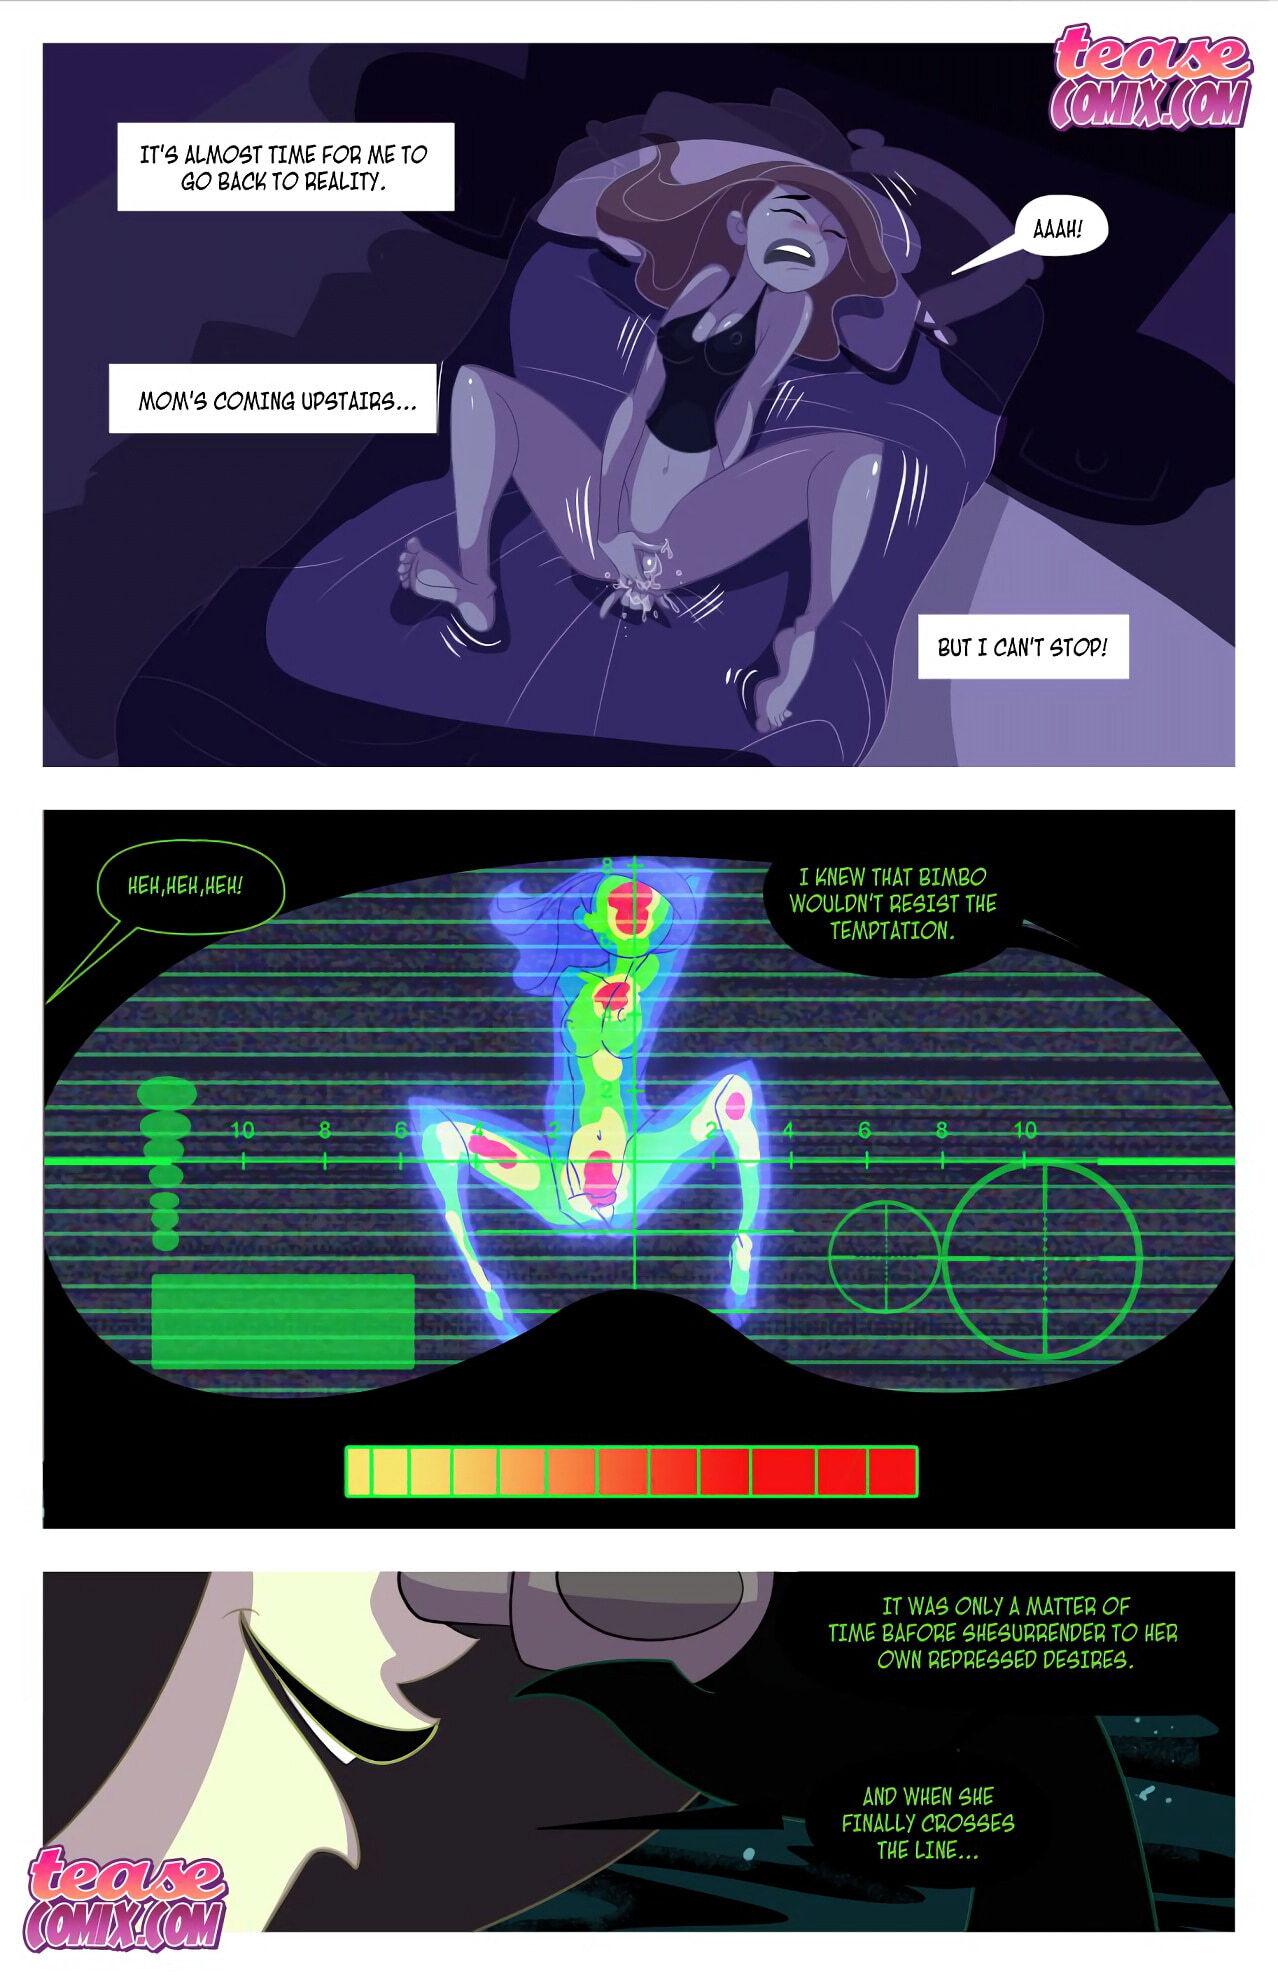 Kinky Possible - A Villain's Bitch Remastered - Page 20